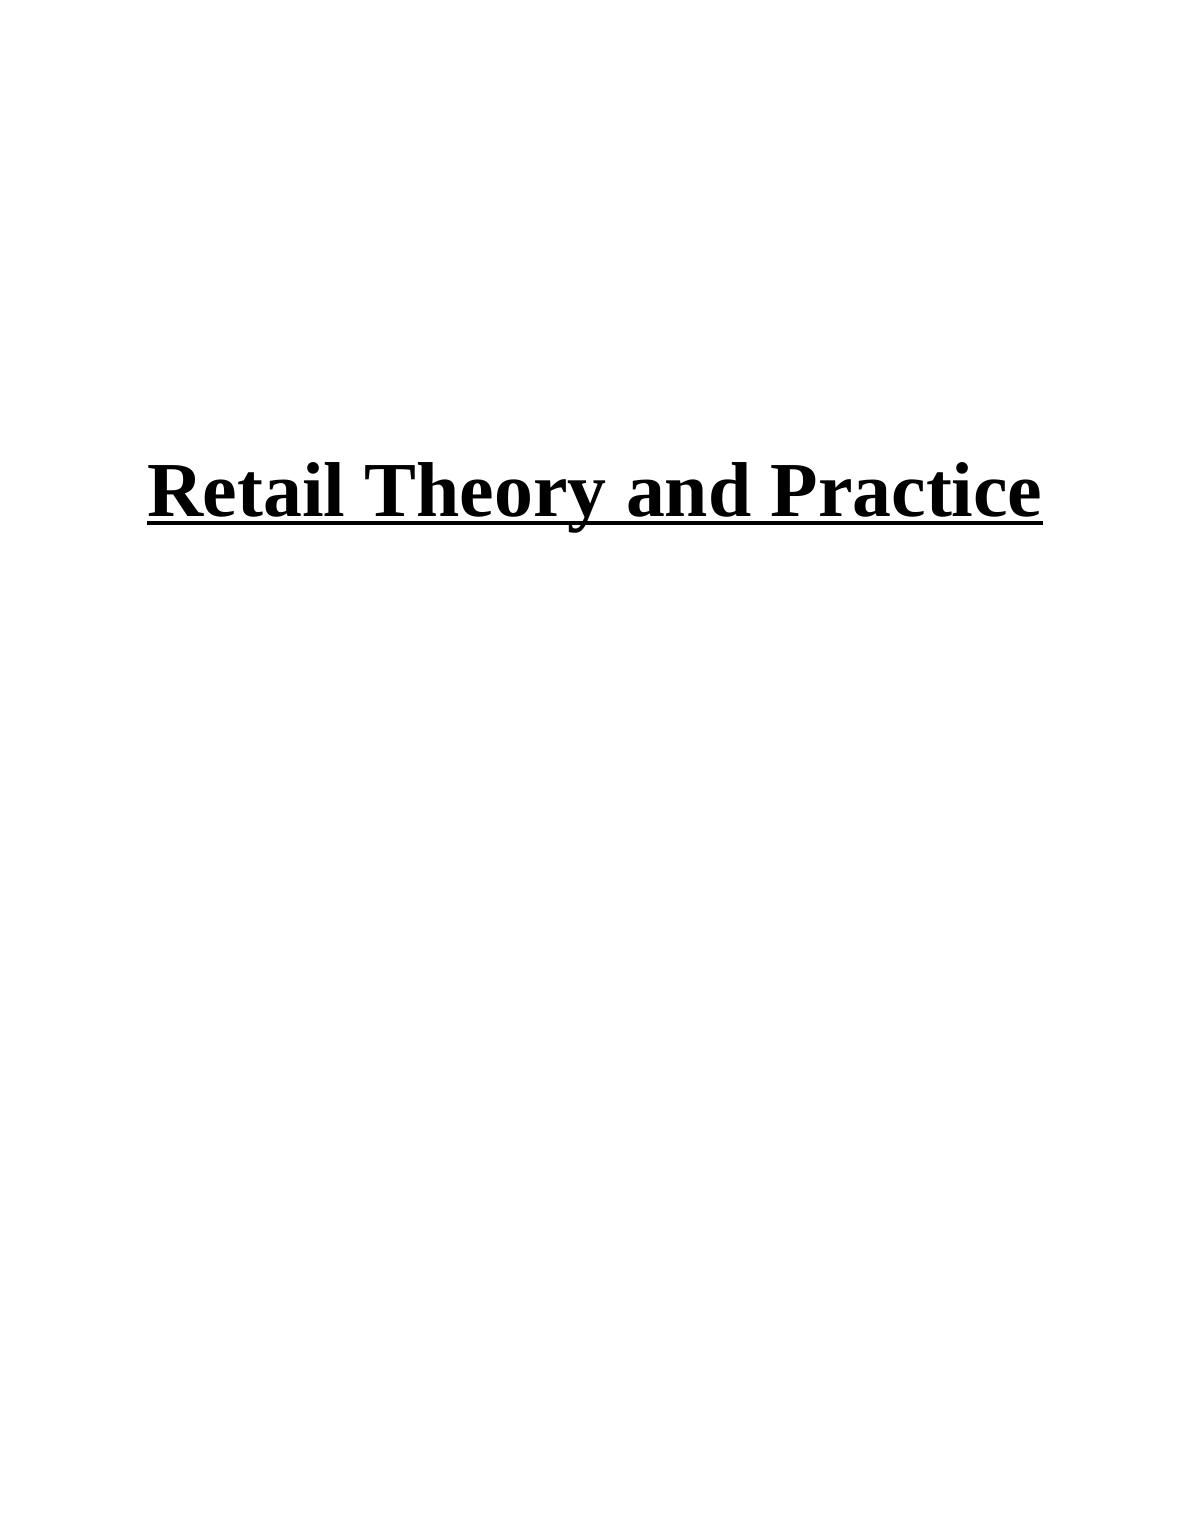 Retail Theory and Practice Assignment Sample_1